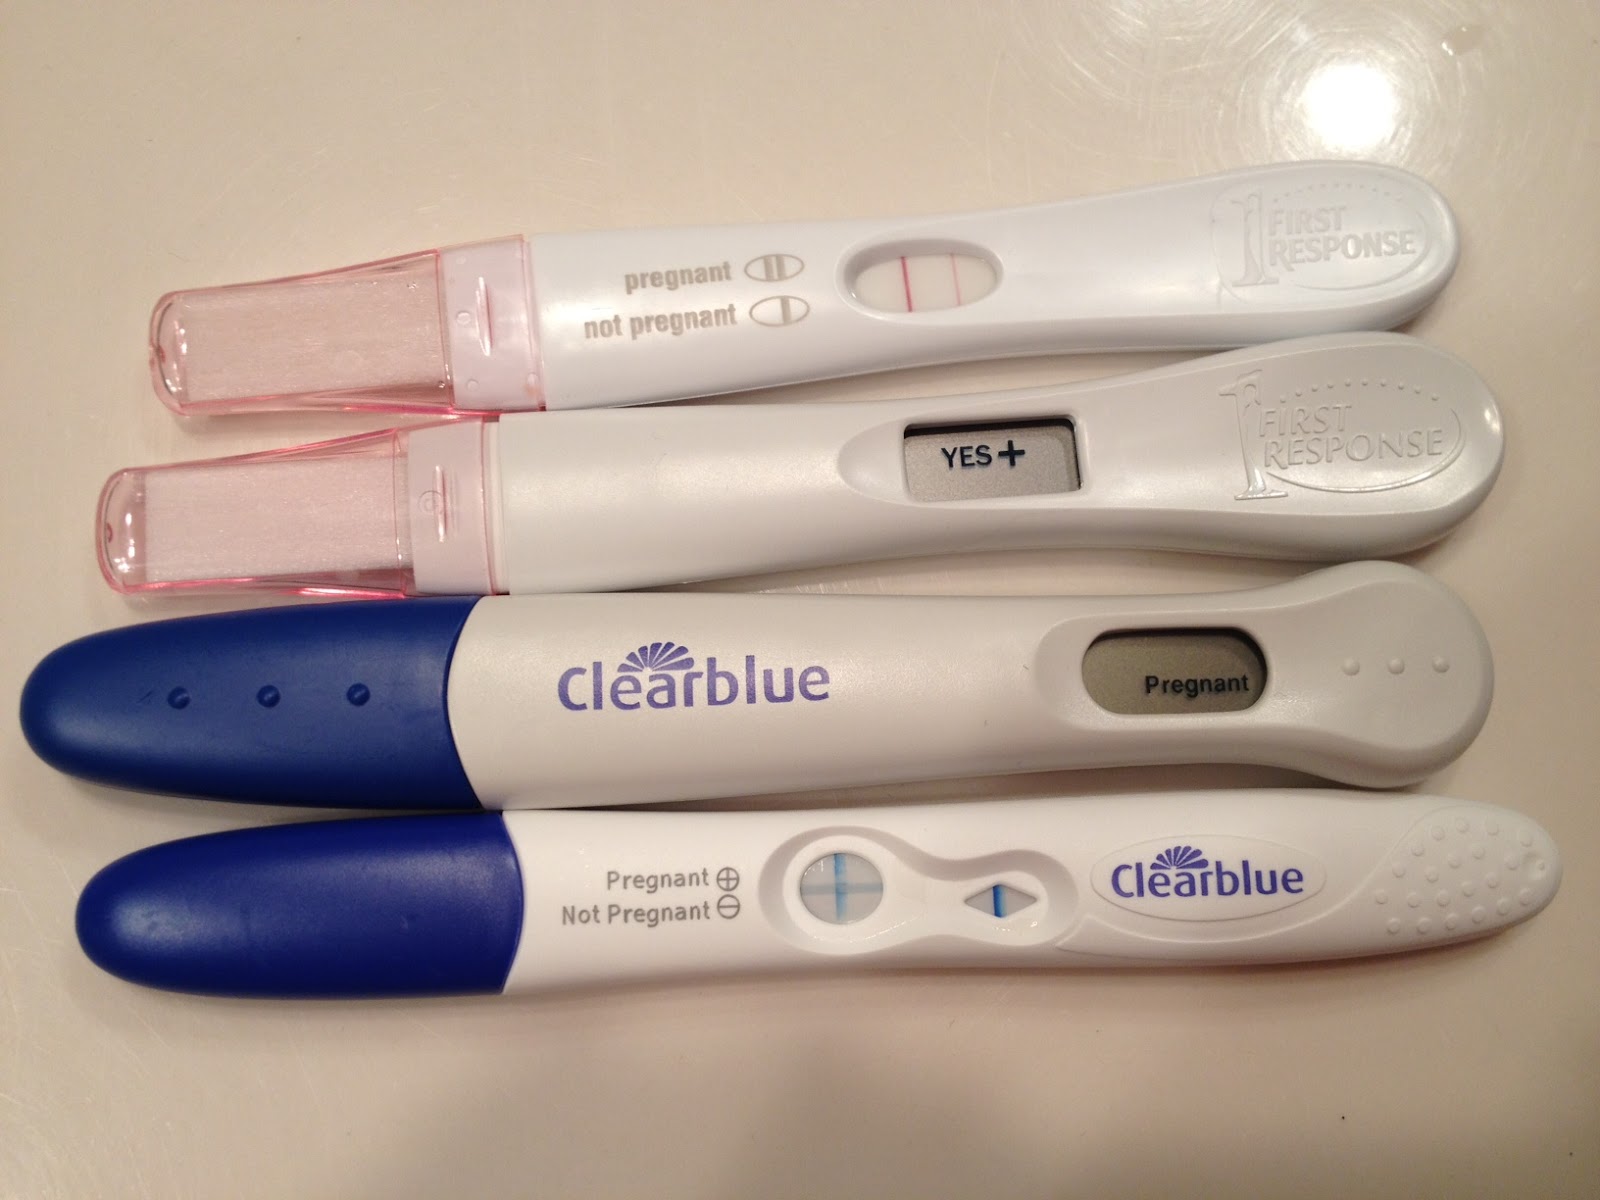 Friday, 9/7: I took a pregnancy test, okay 6 tests, on a hunch. 